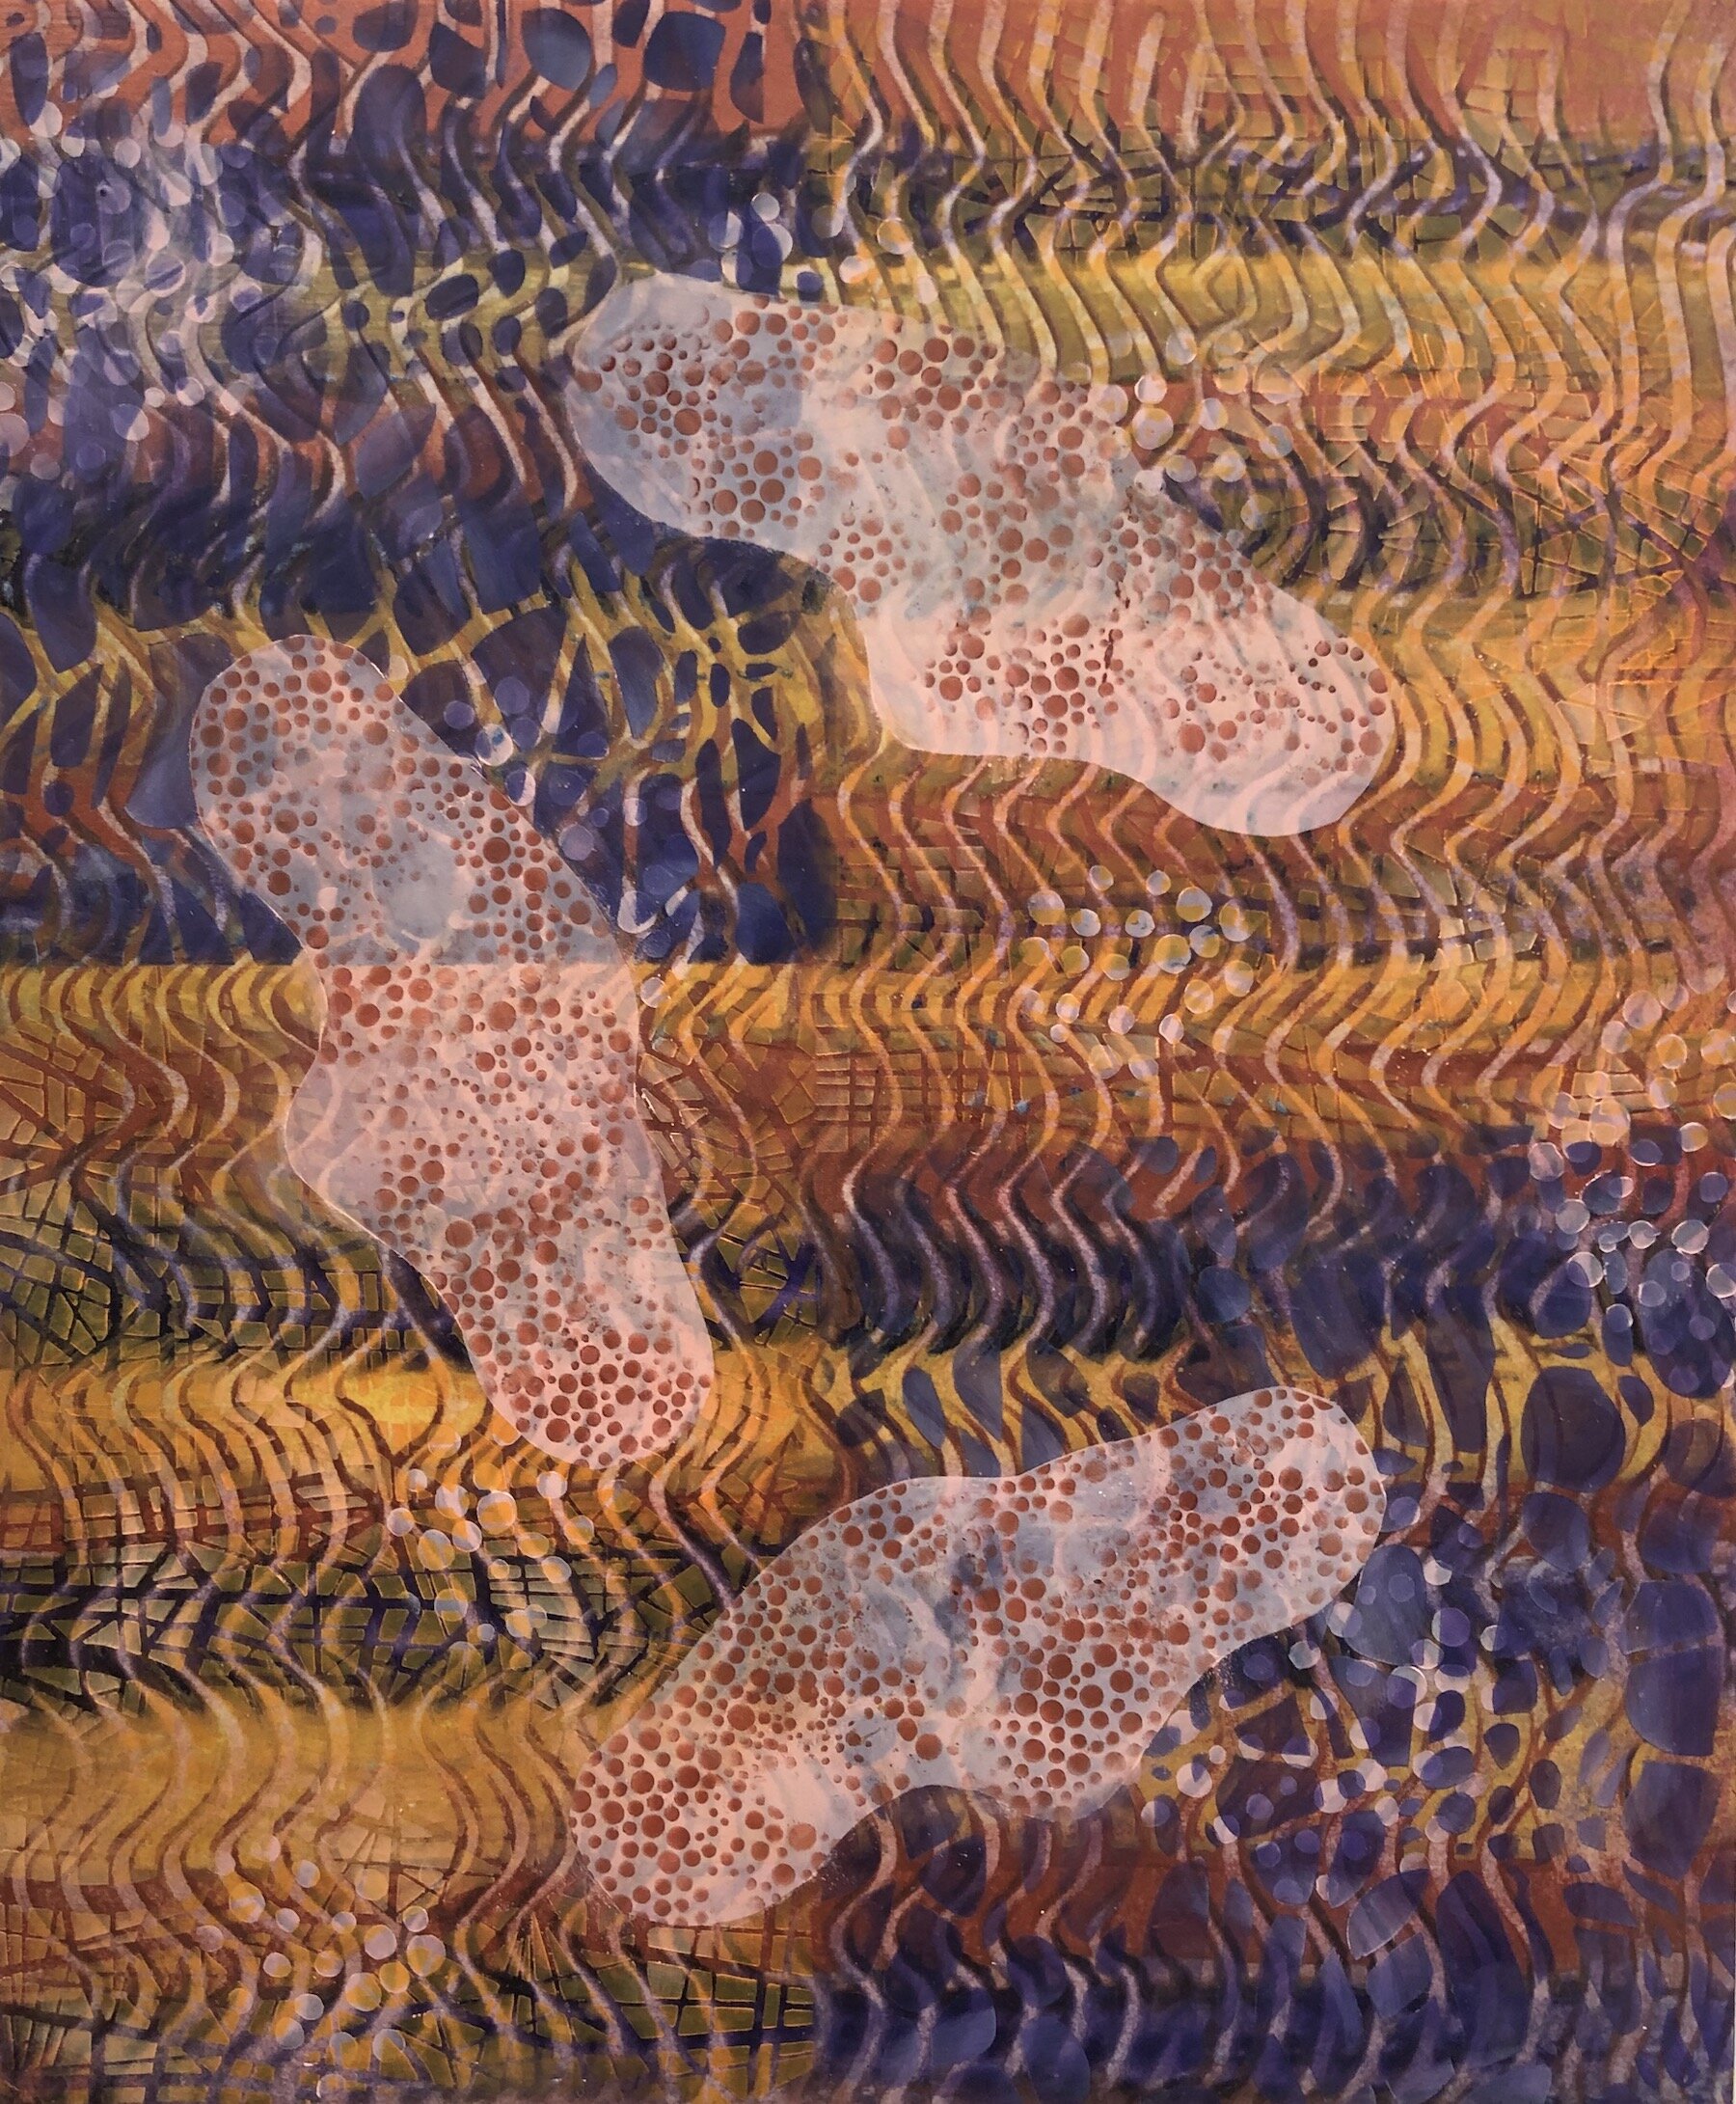    Patterns Layers 6    encaustic, pastel on paper, 17 x 14 inches 